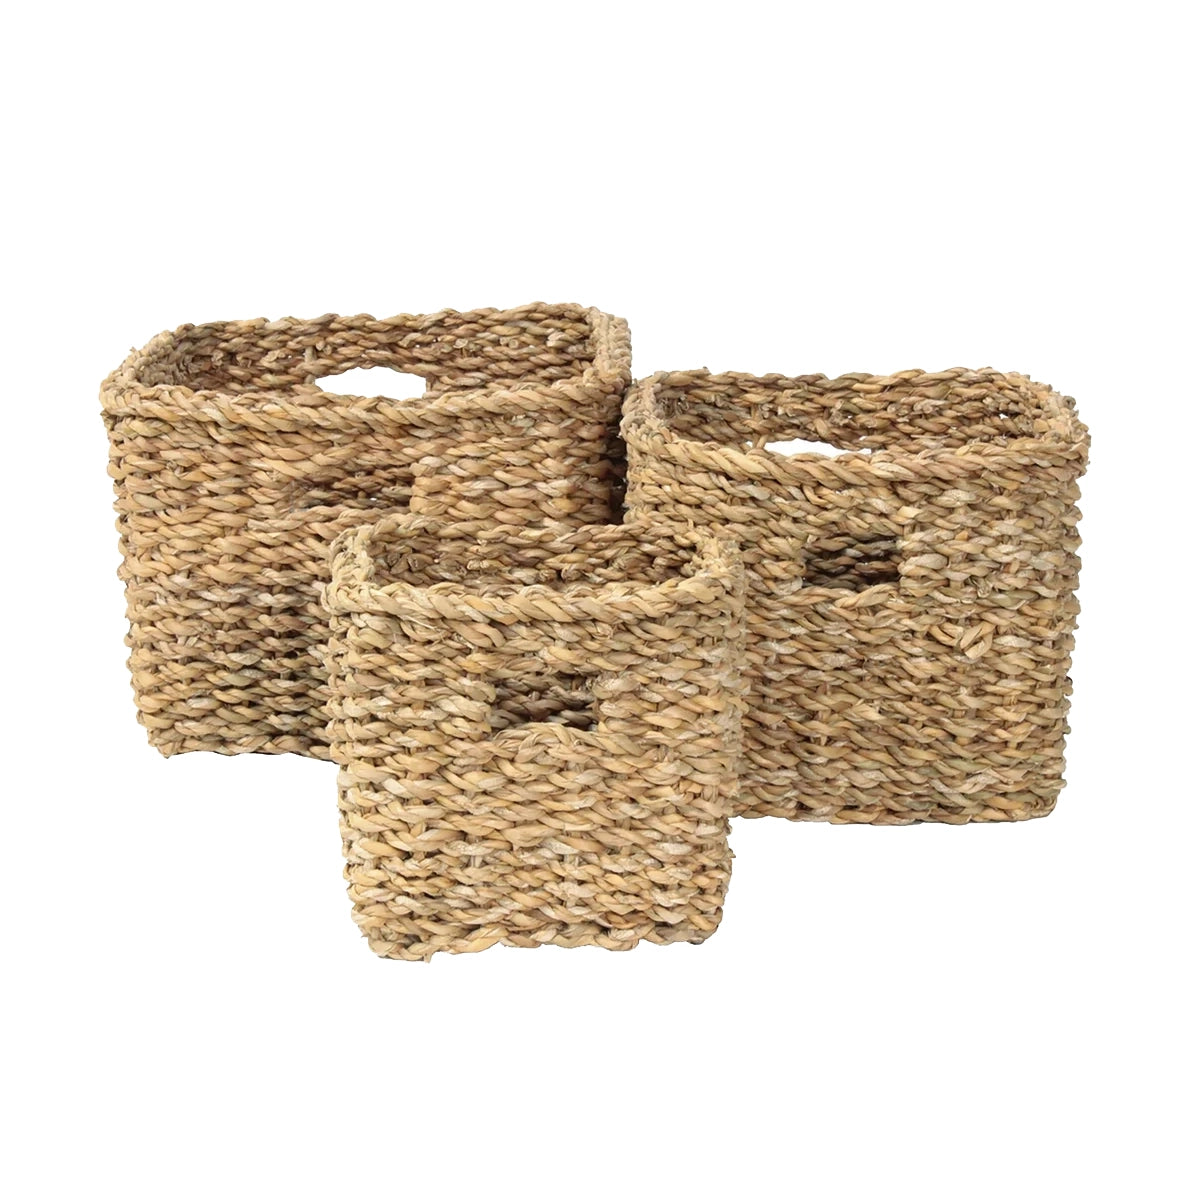 Small square seagrass basket with cut-out handle